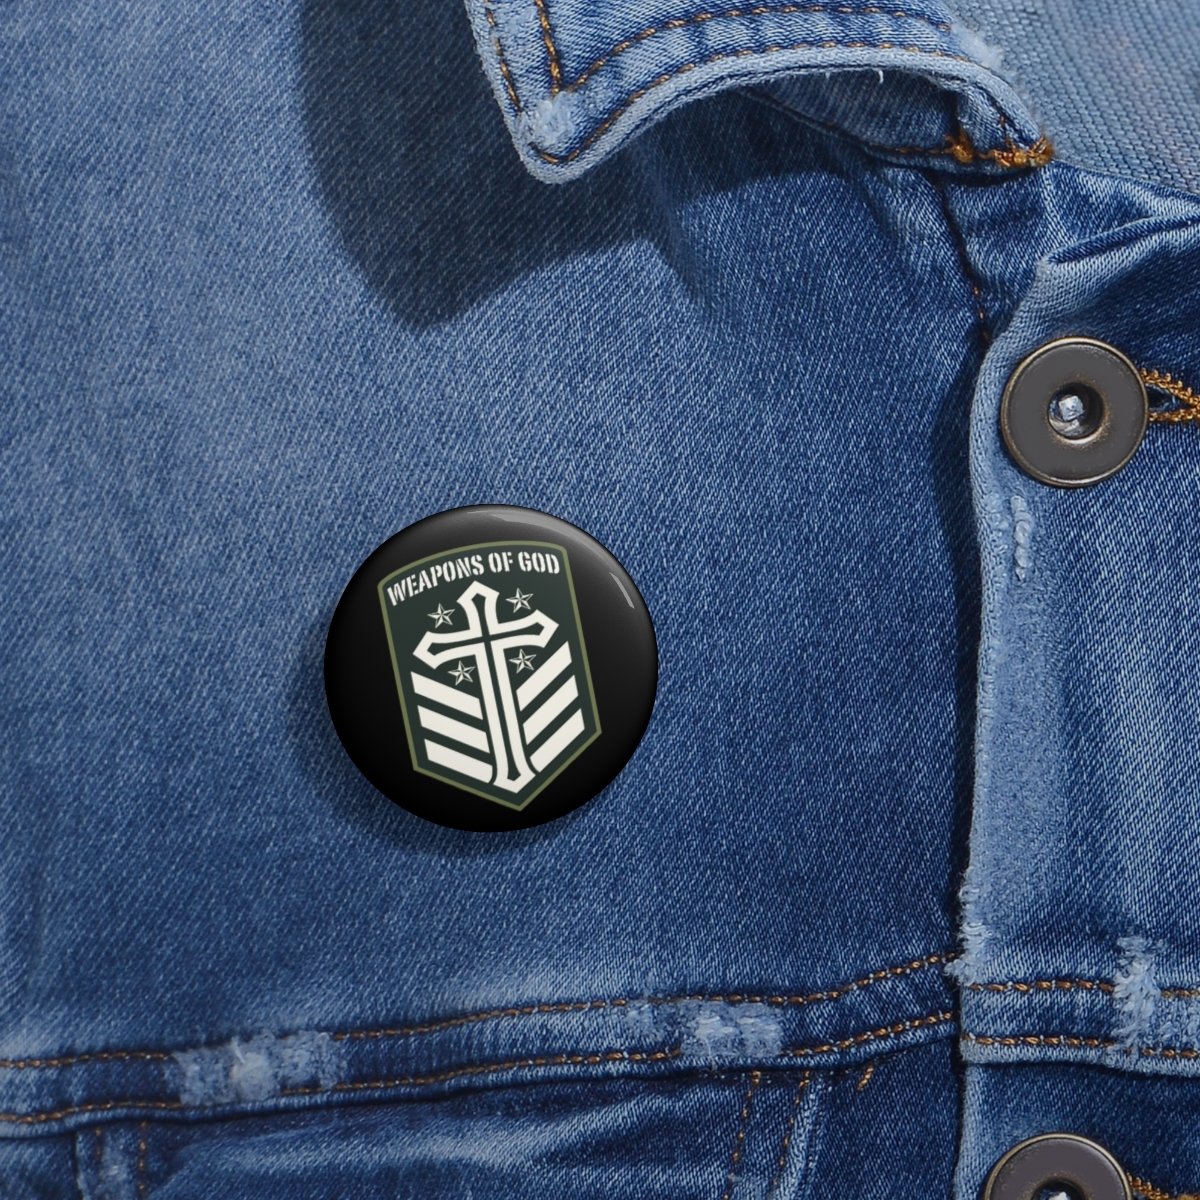 Weapons of God Emblem Pin Buttons